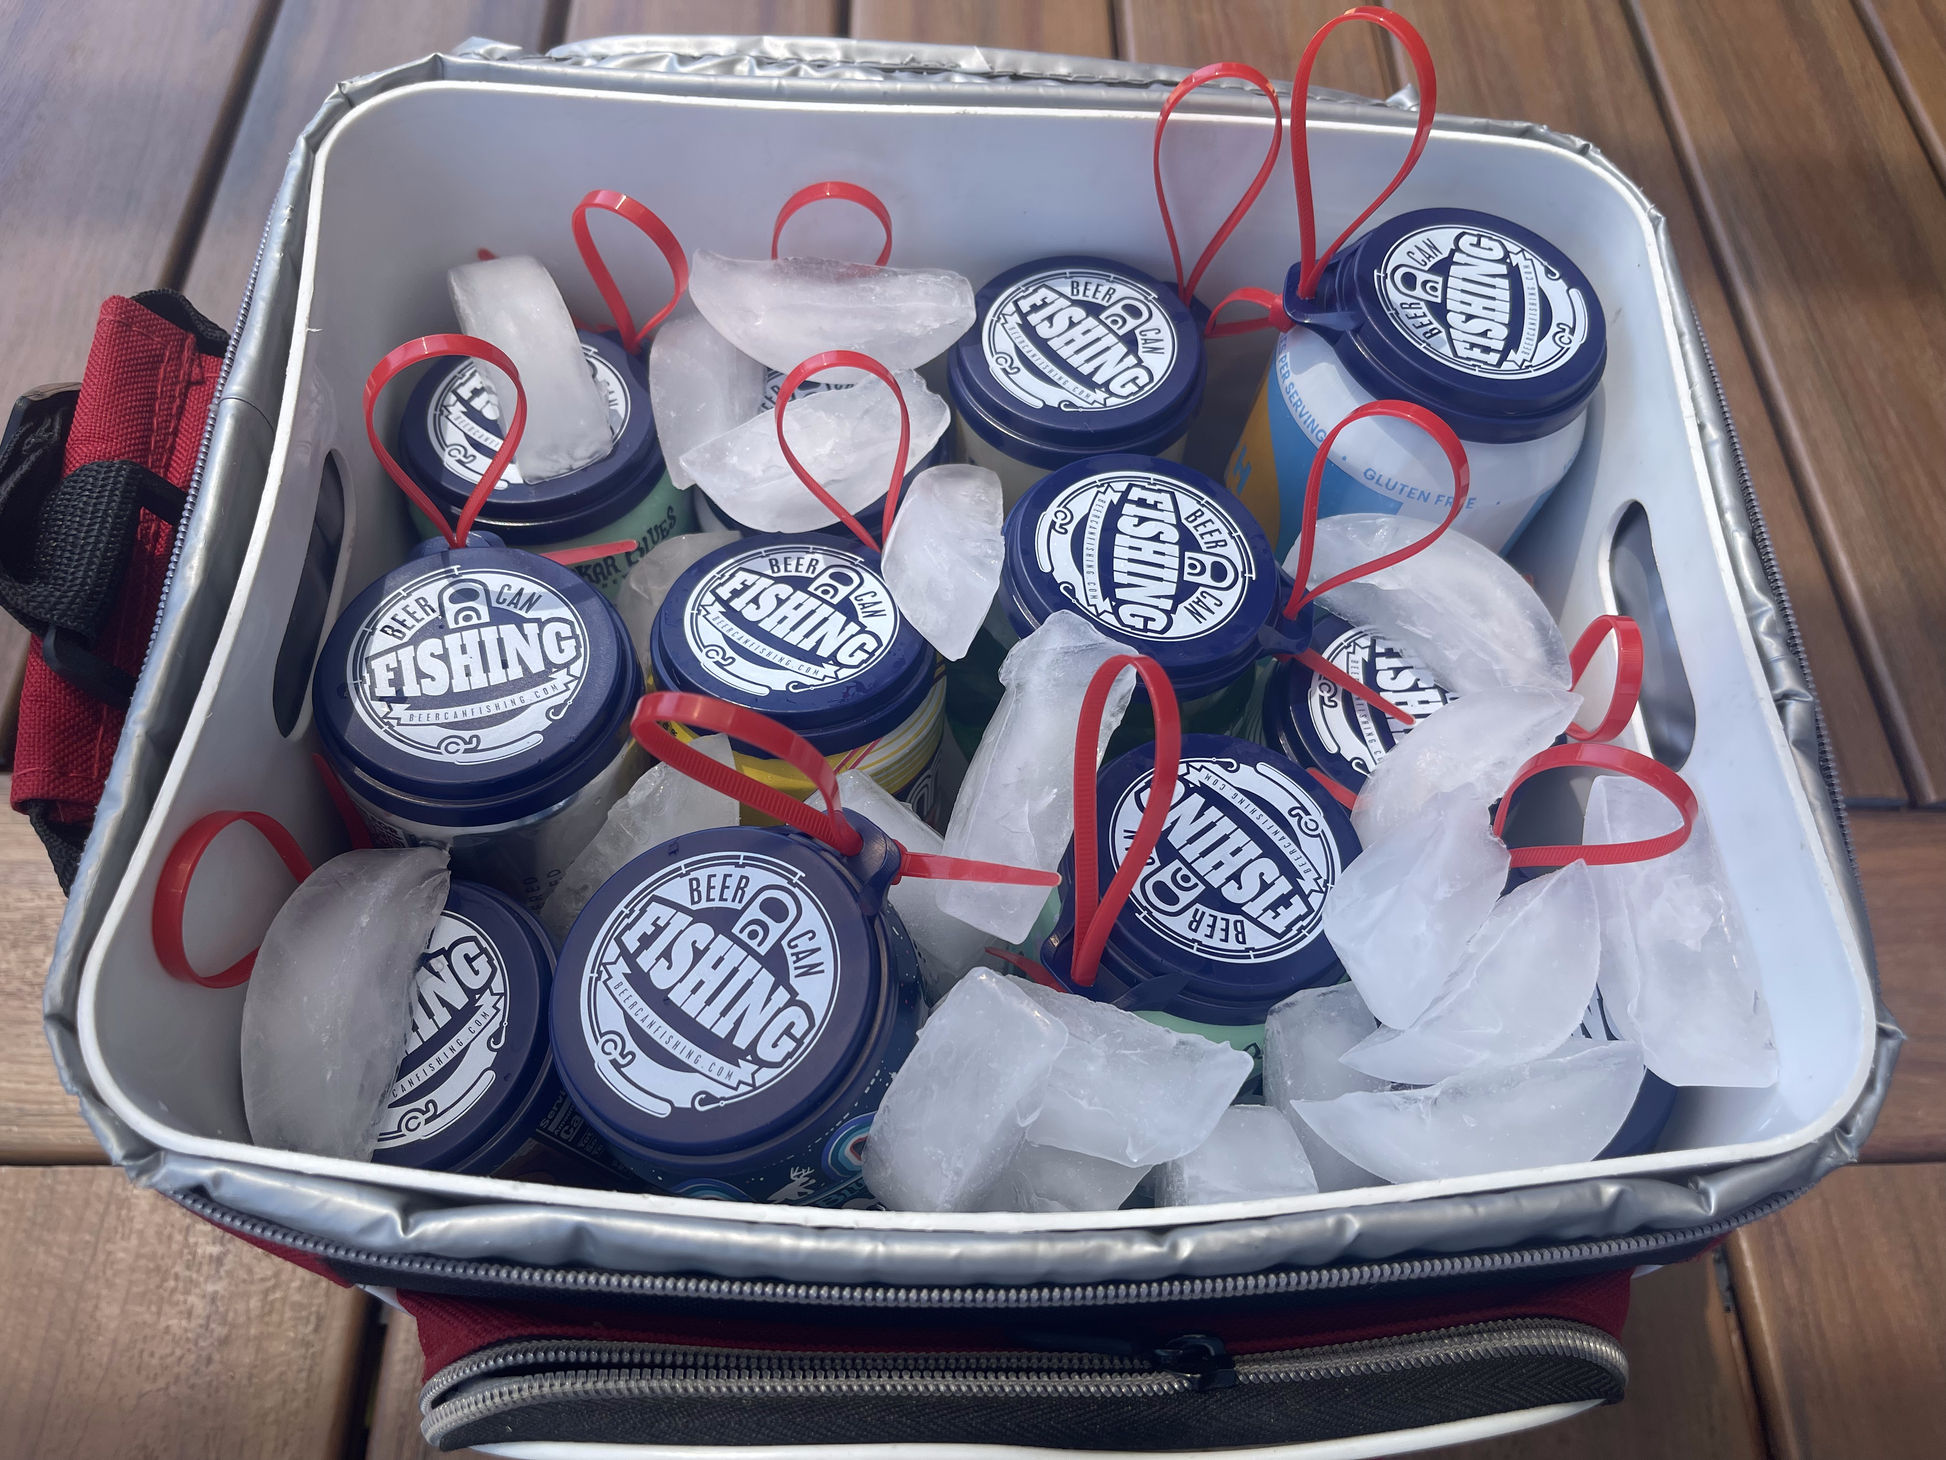 12 pack of beer can fishing game lids in a cooler